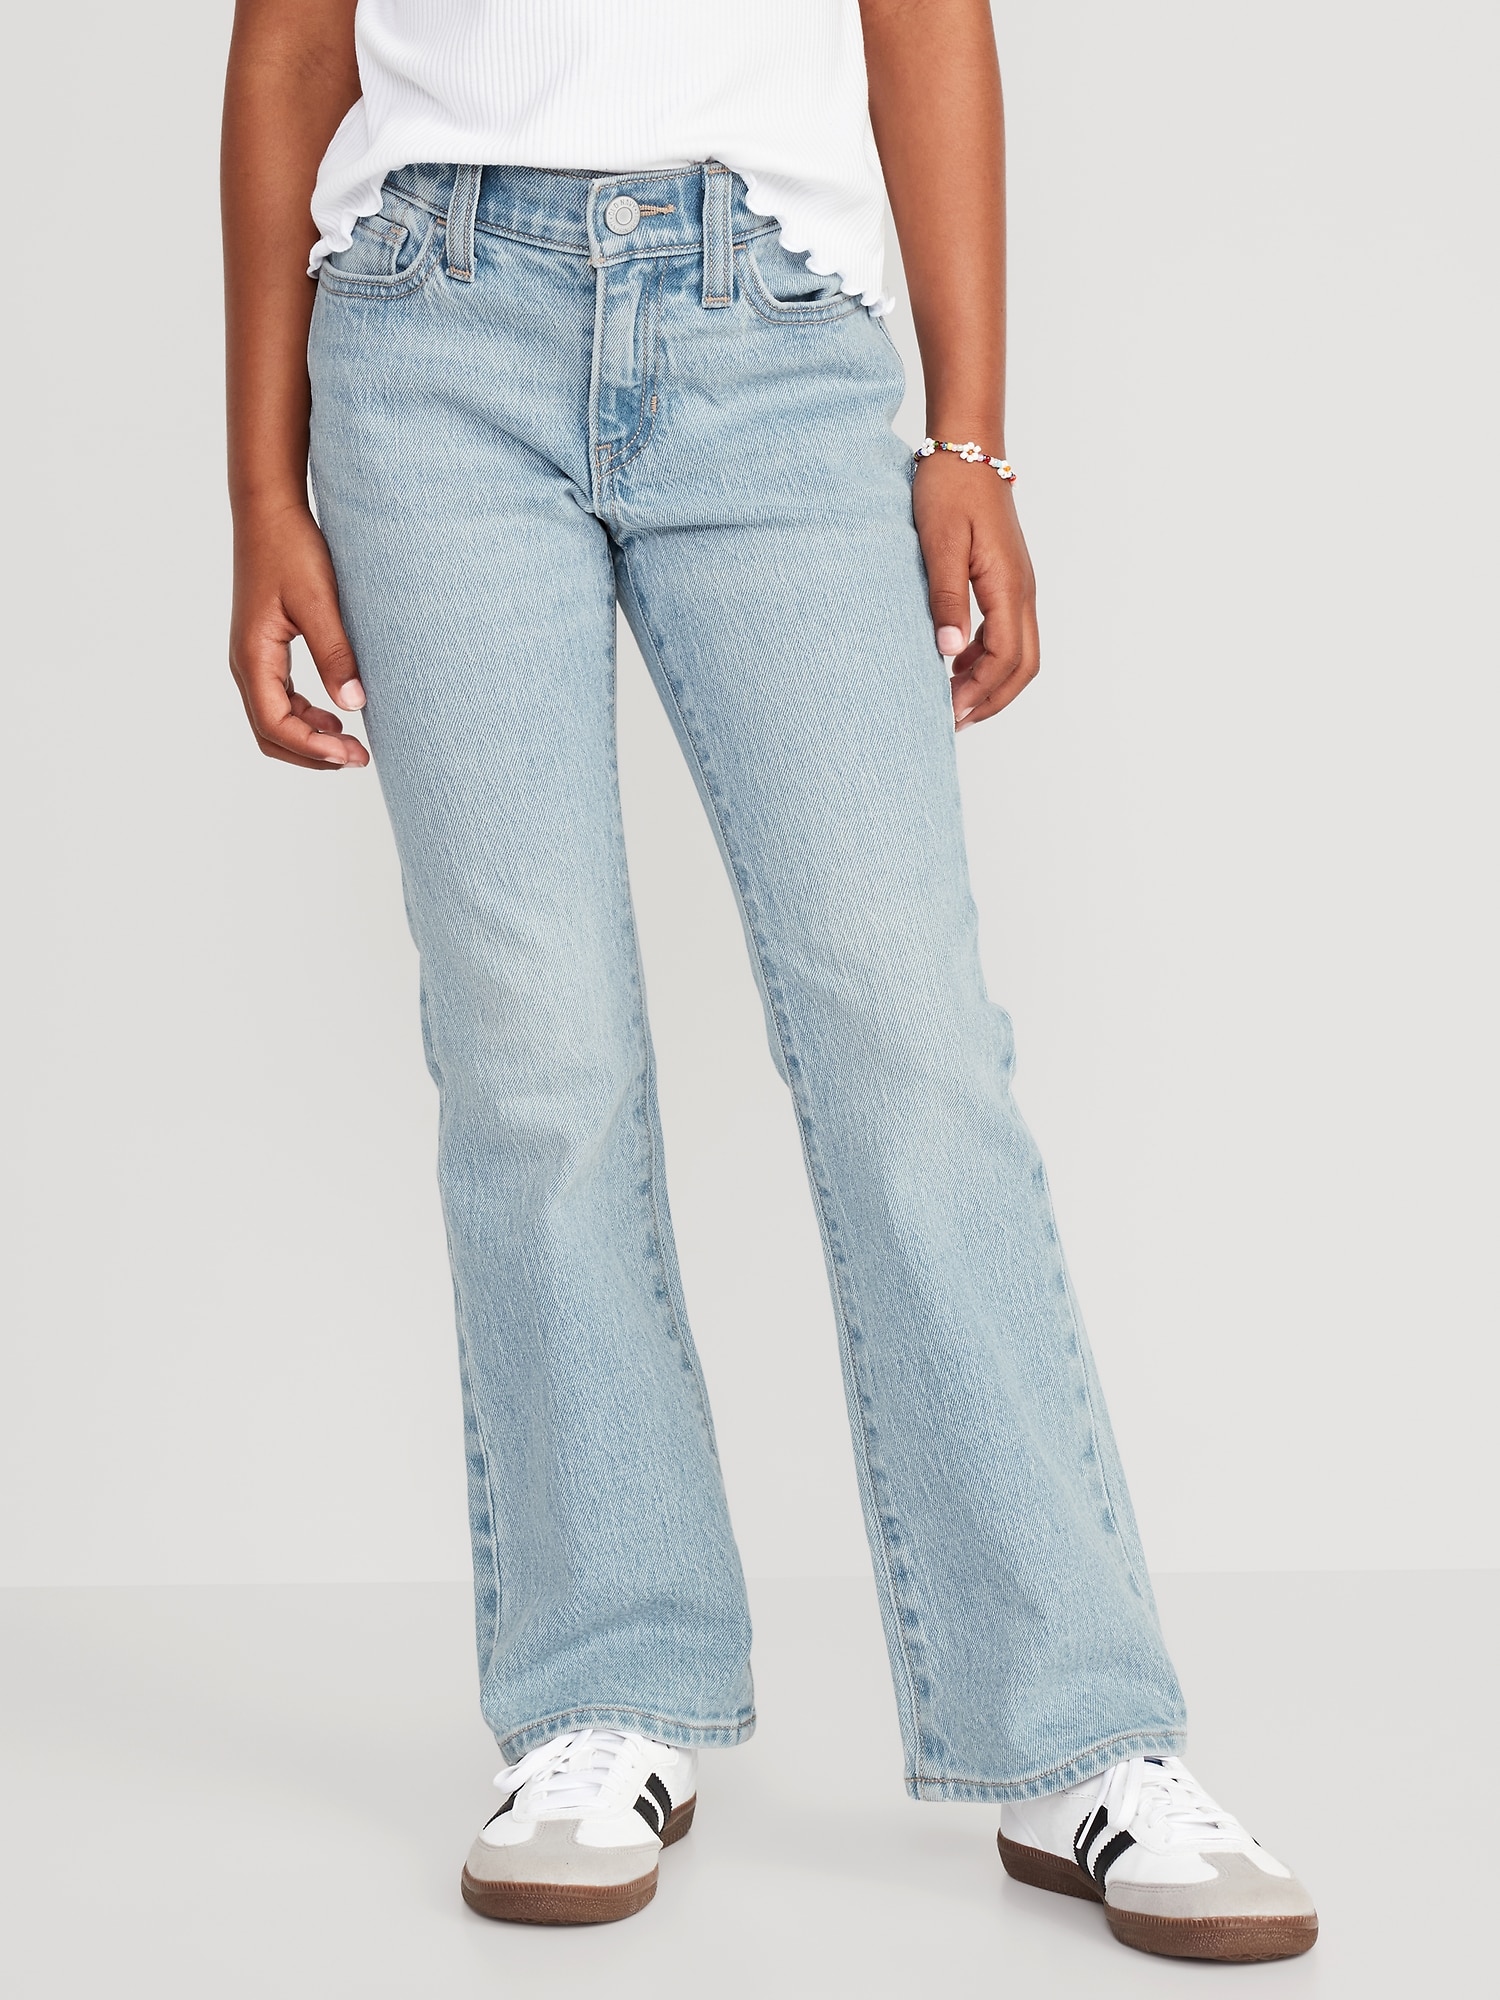 Mid-Rise Built-In Tough Boot-Cut Jeans for Girls Hot Deal